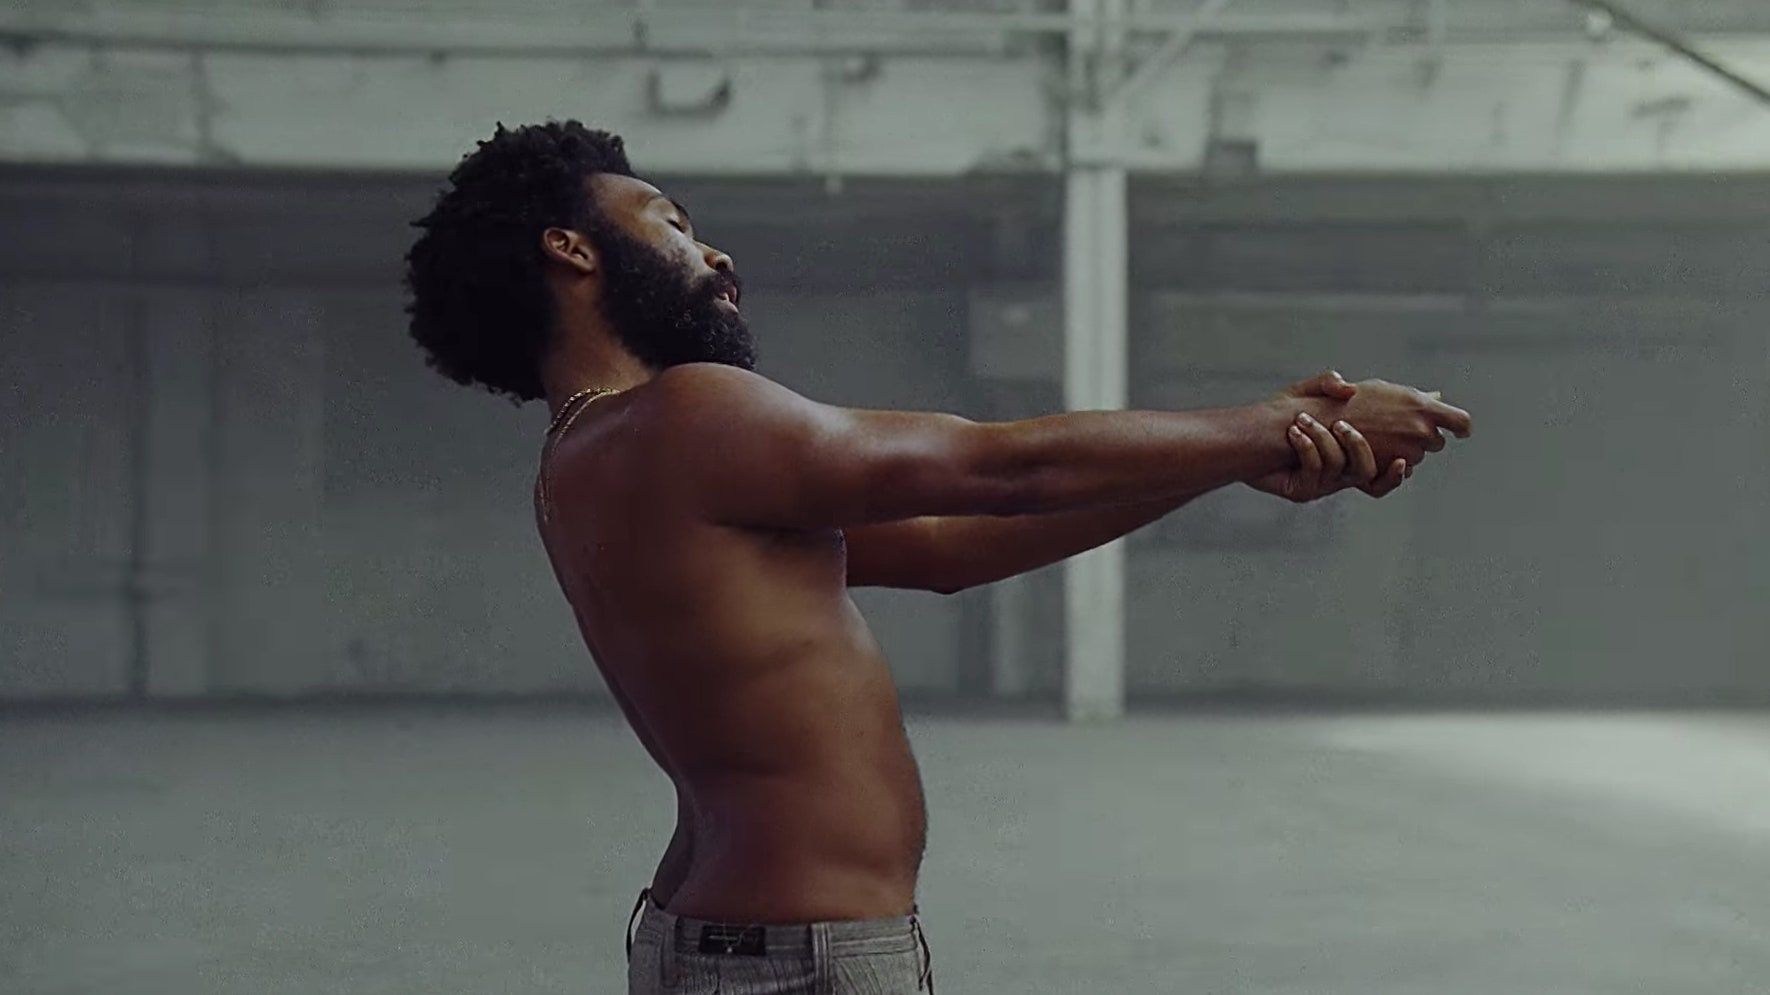 Donald Glover "This Is America"